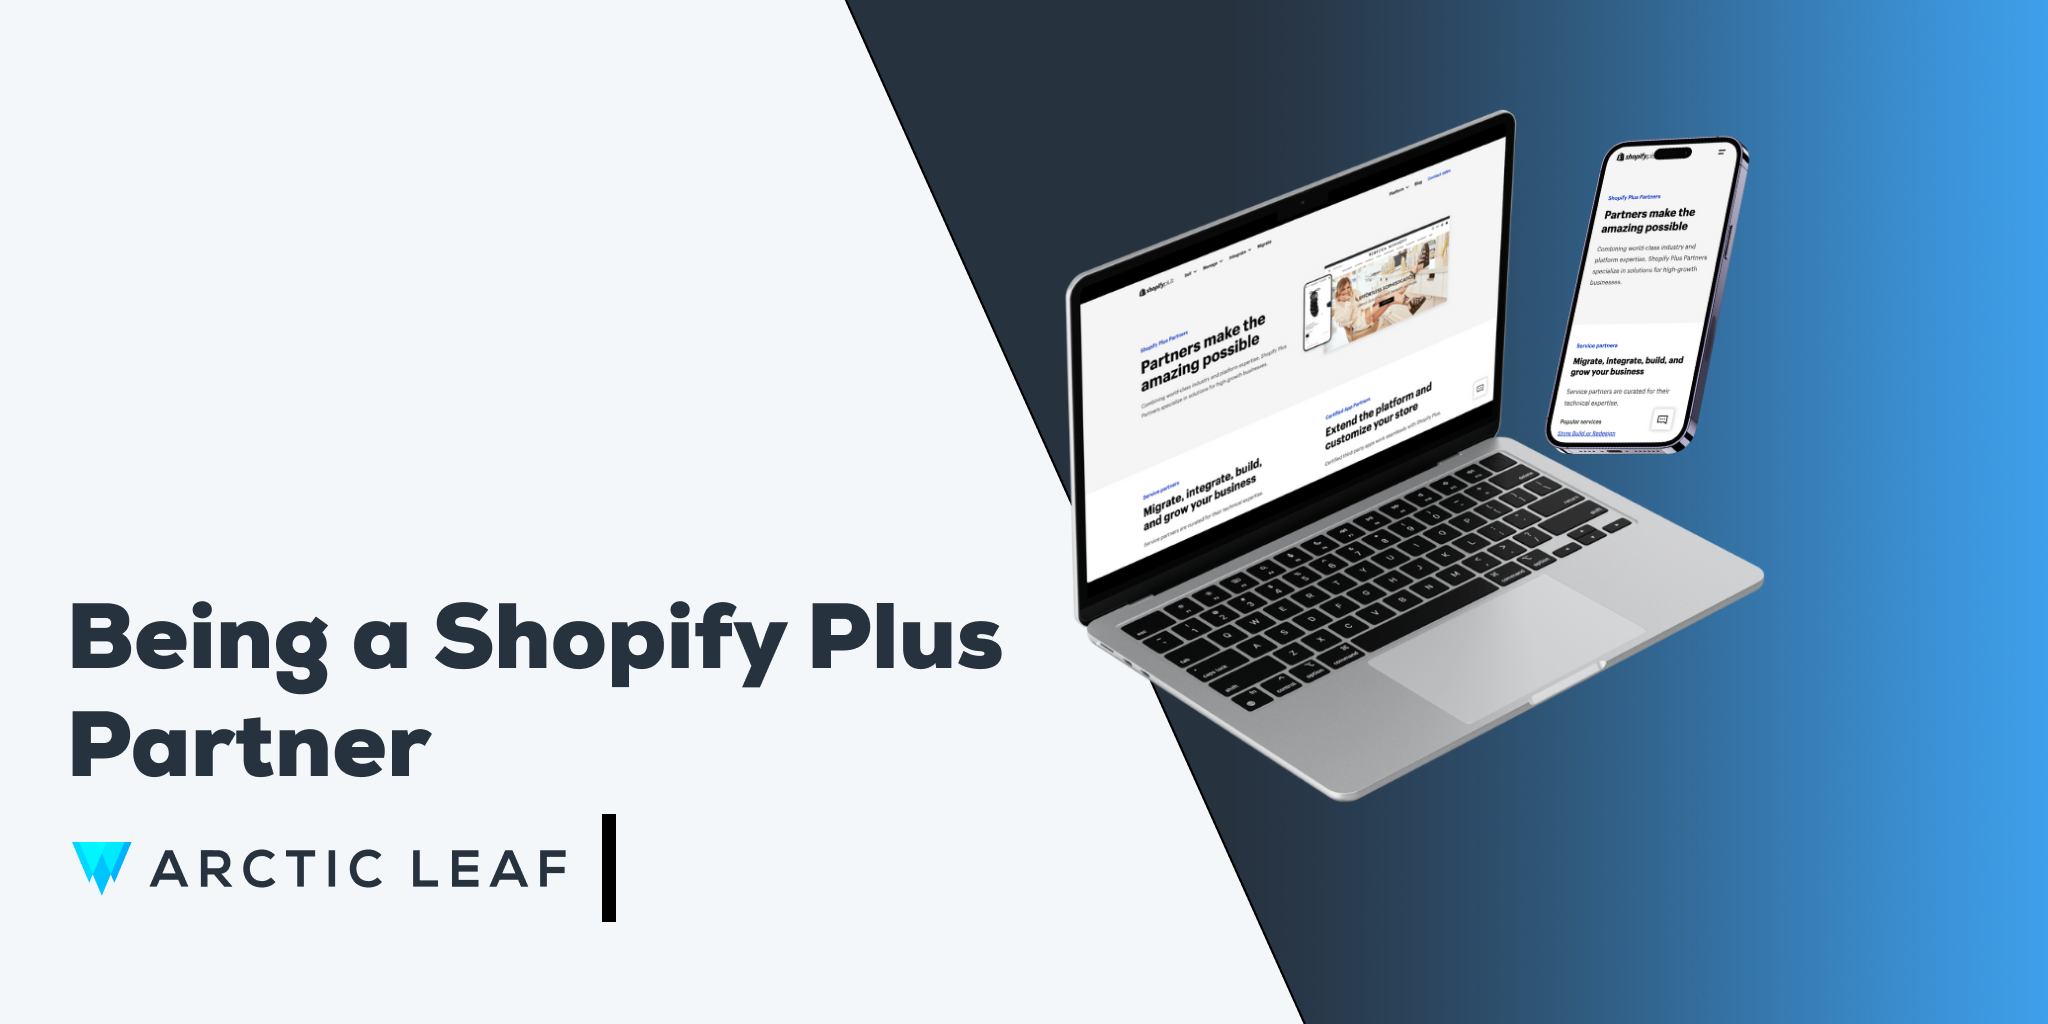 Arctic Leaf is a Shopify Plus agency partner in the e-commerce space